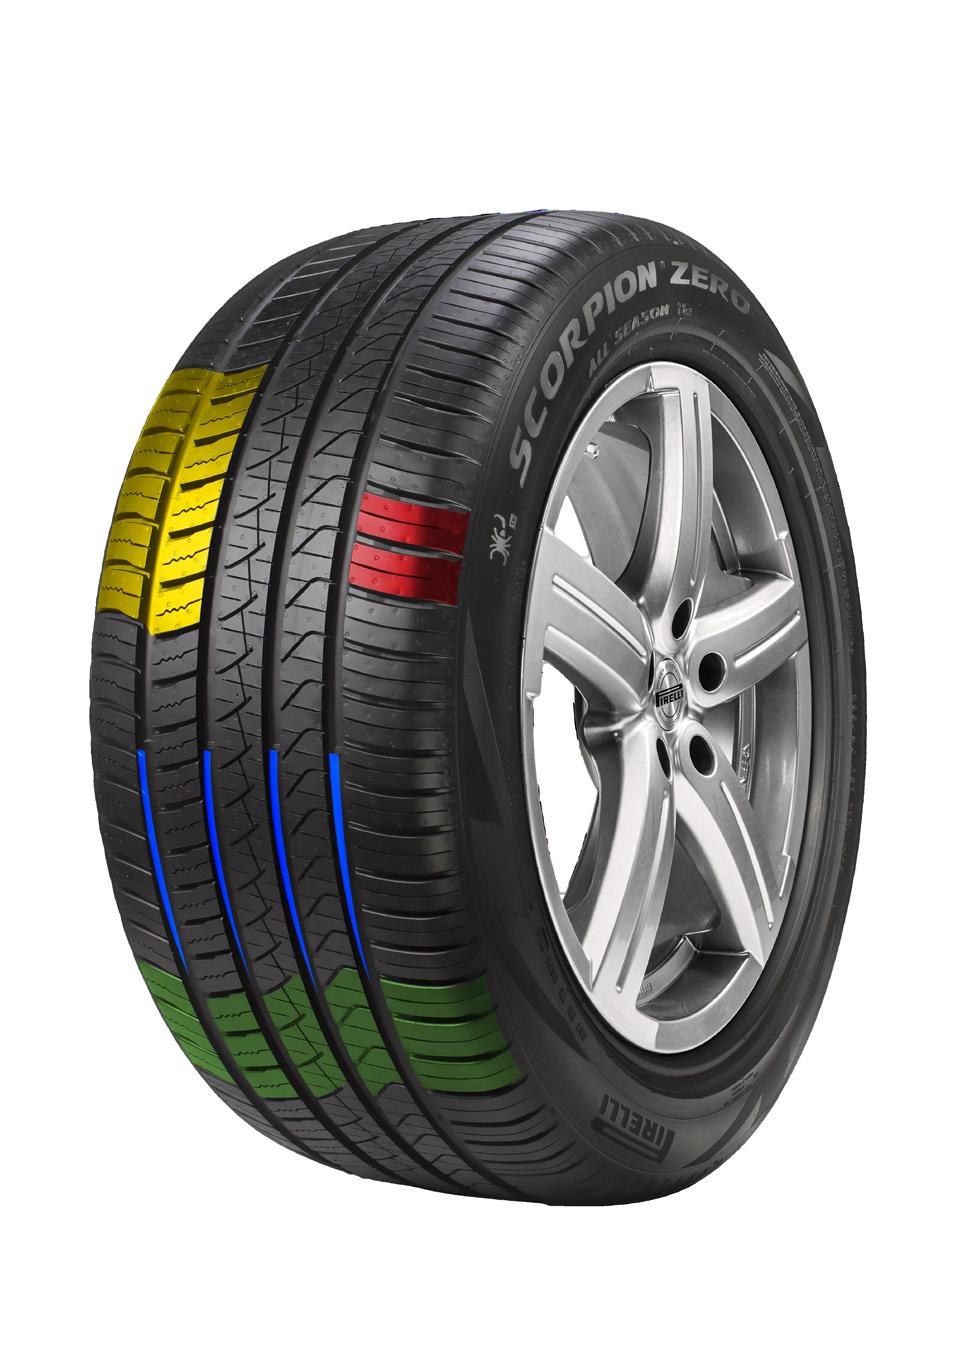 Outstanding all-season handling for your performance SUVs The Scorpion TM Zero All Season Plus is the newest member of the Scorpion family that Pirelli has developed for the Street/Sport